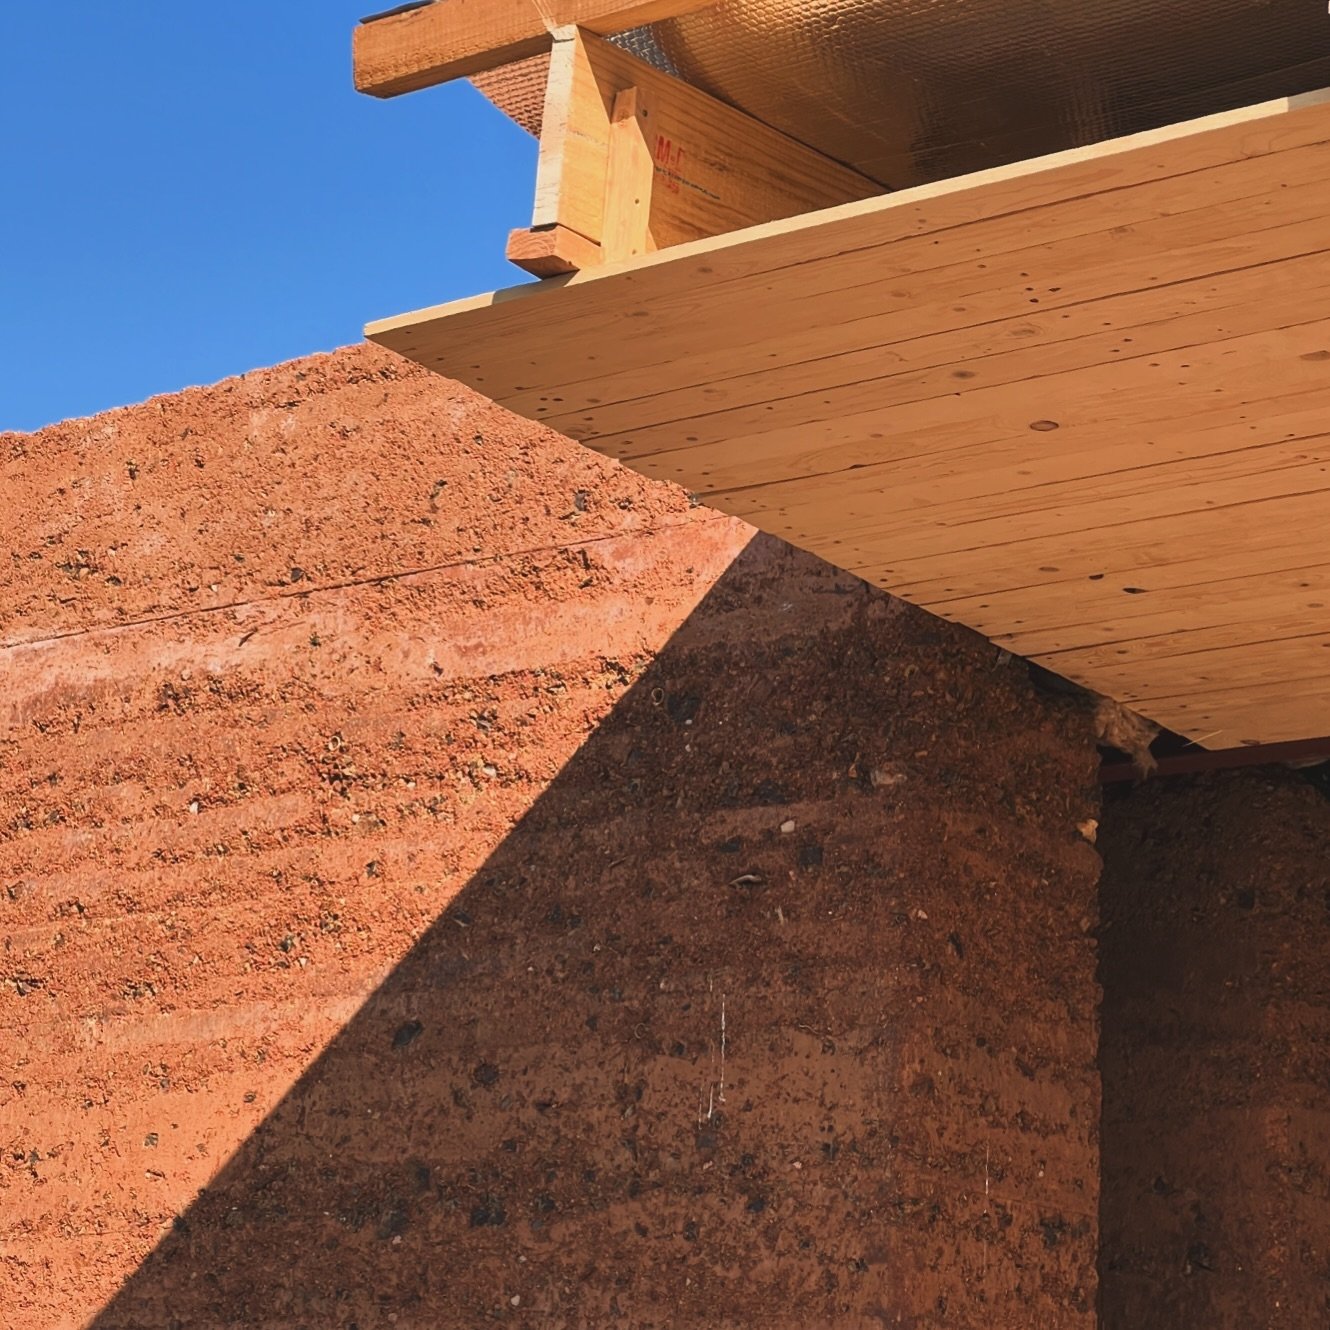 Colours and textures 

#rammedearth #rammedearthwall #earthhouse #buildingsustainably